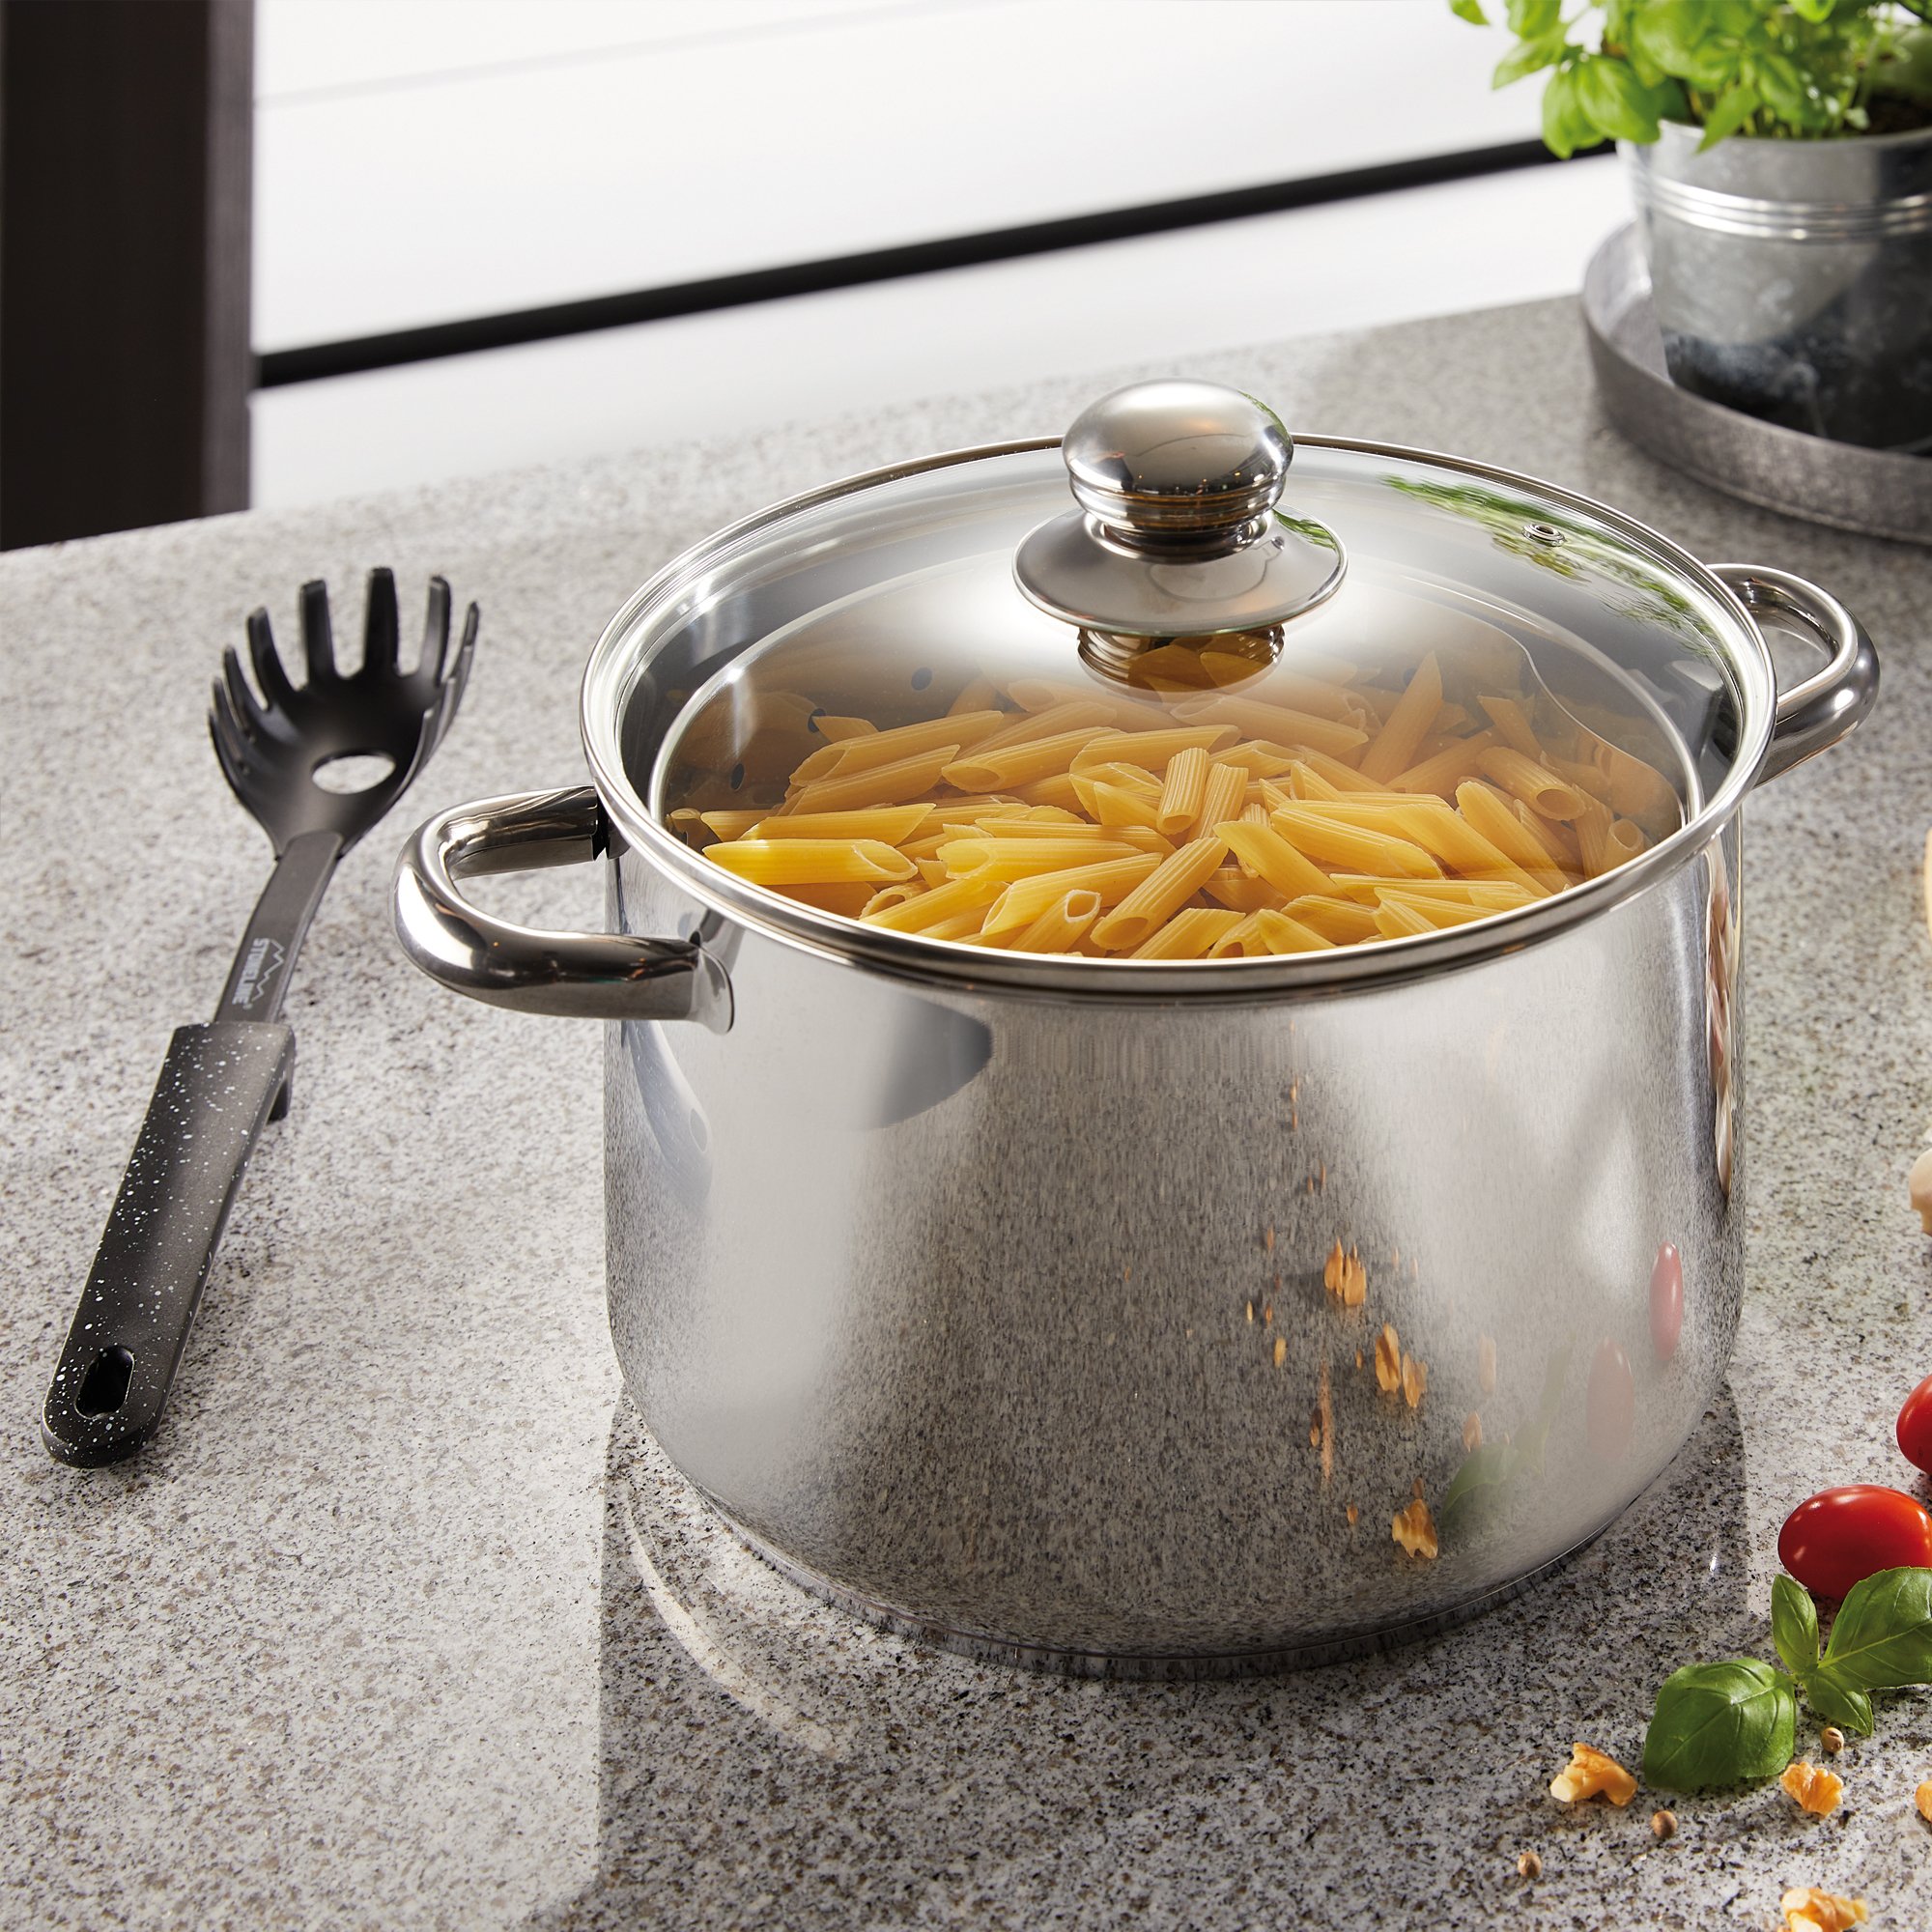 BEYOND® Cooking Pot 24 cm, with Lid and Strainer Basket | Stainless Steel Pasta Pot